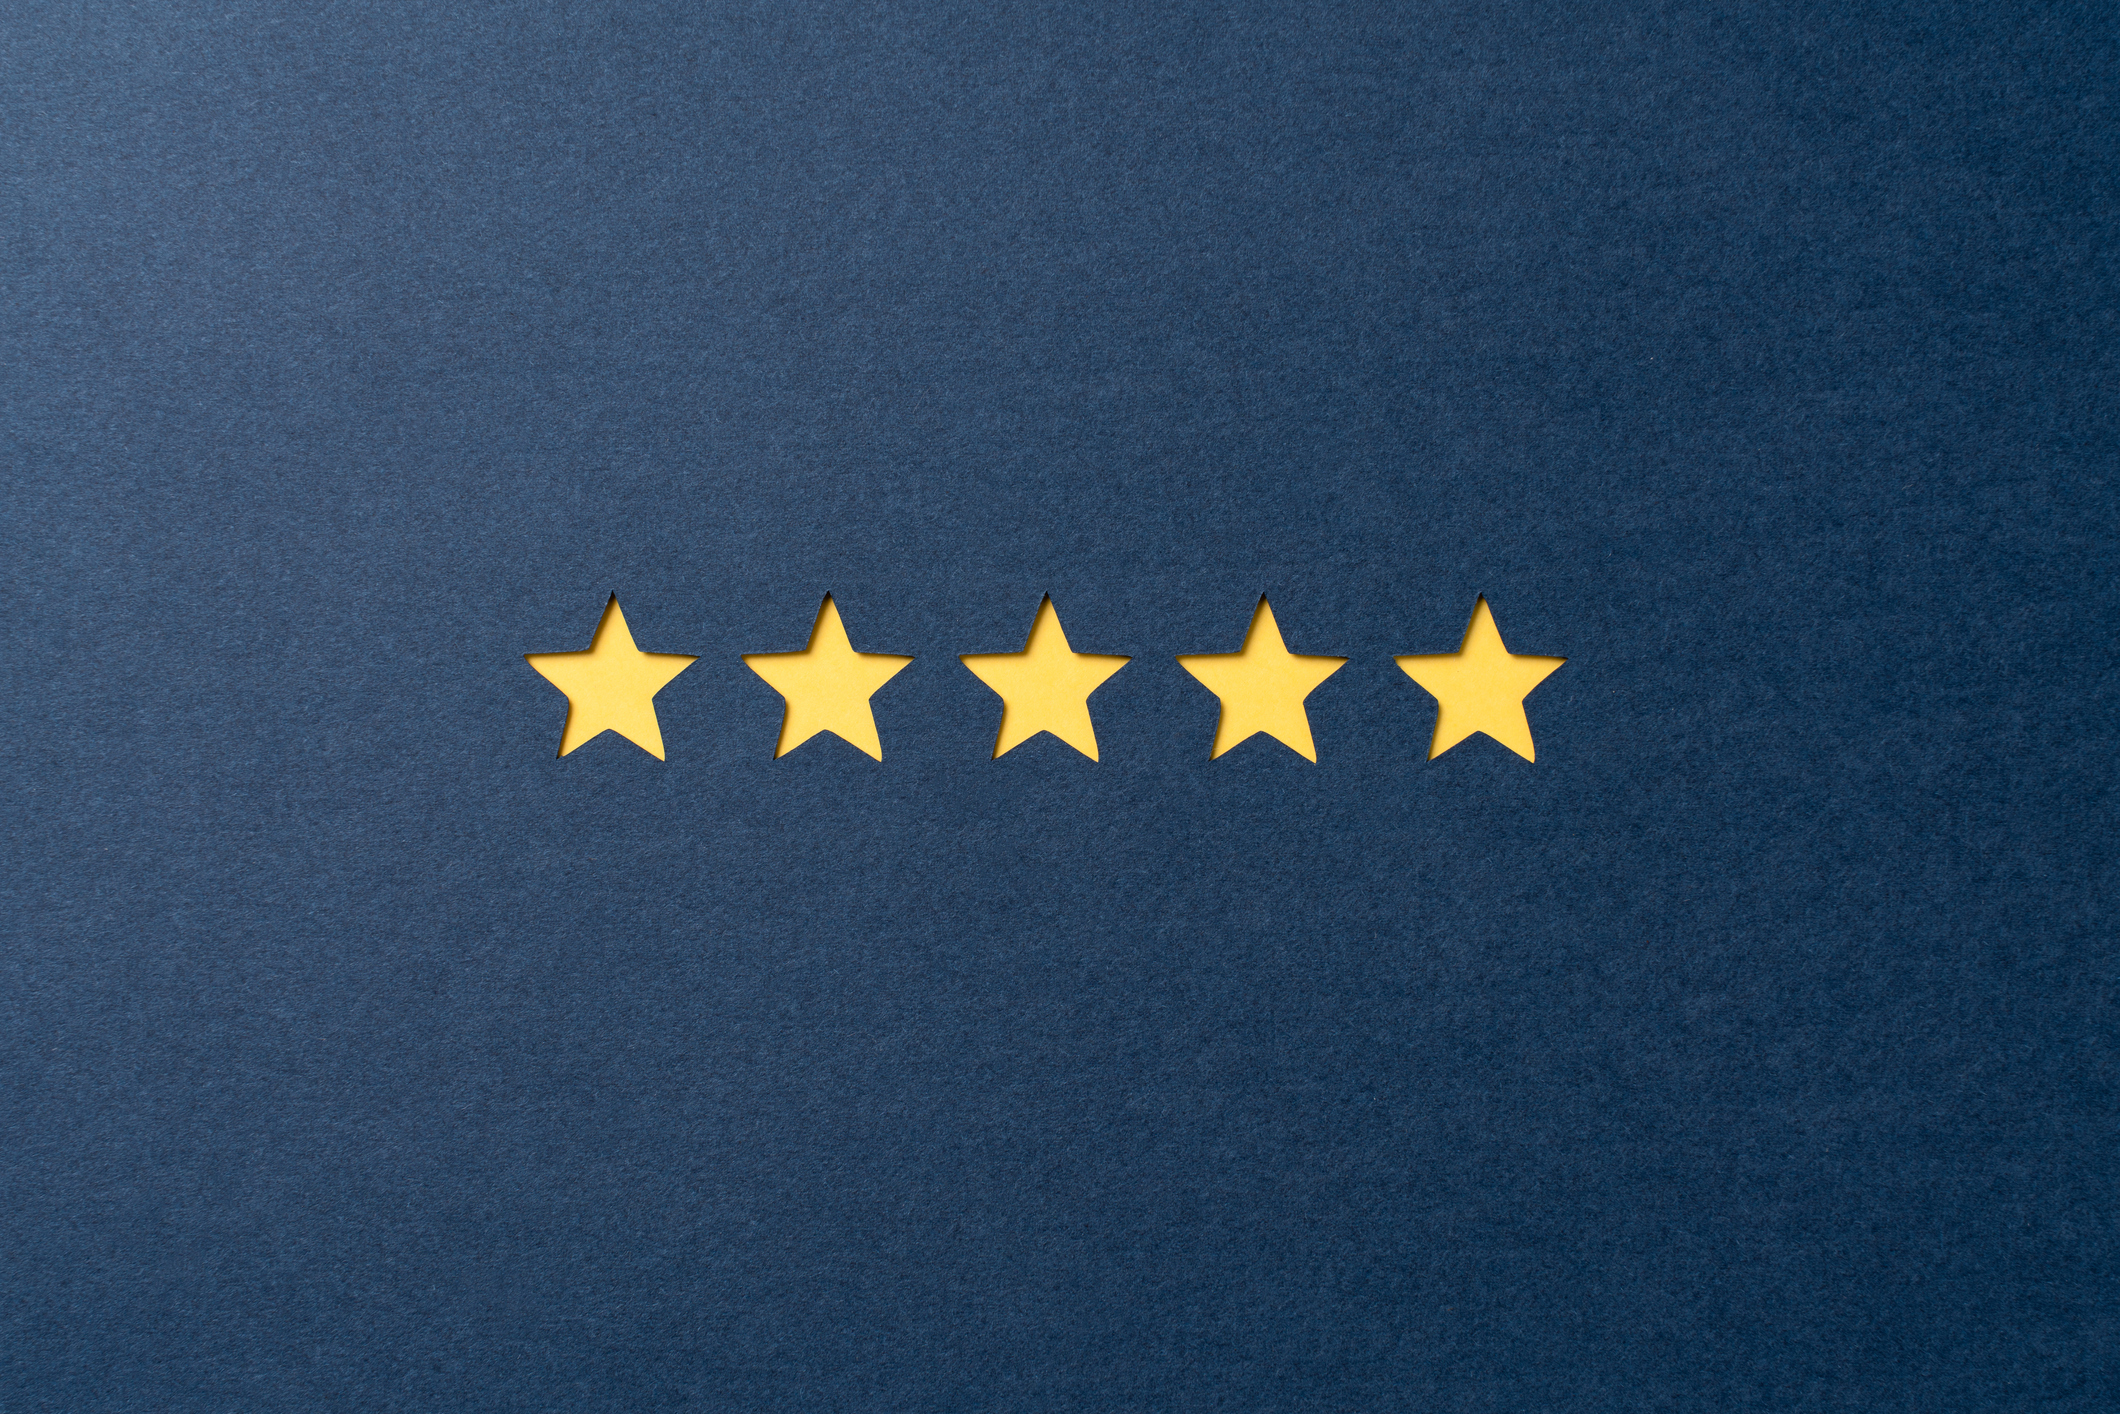 Paper Craft of Five Star Rating for Satisfaction Review Concept, Perfection Concept. Yellow Colored Star Shape Review on Blue Background Directly Above View.